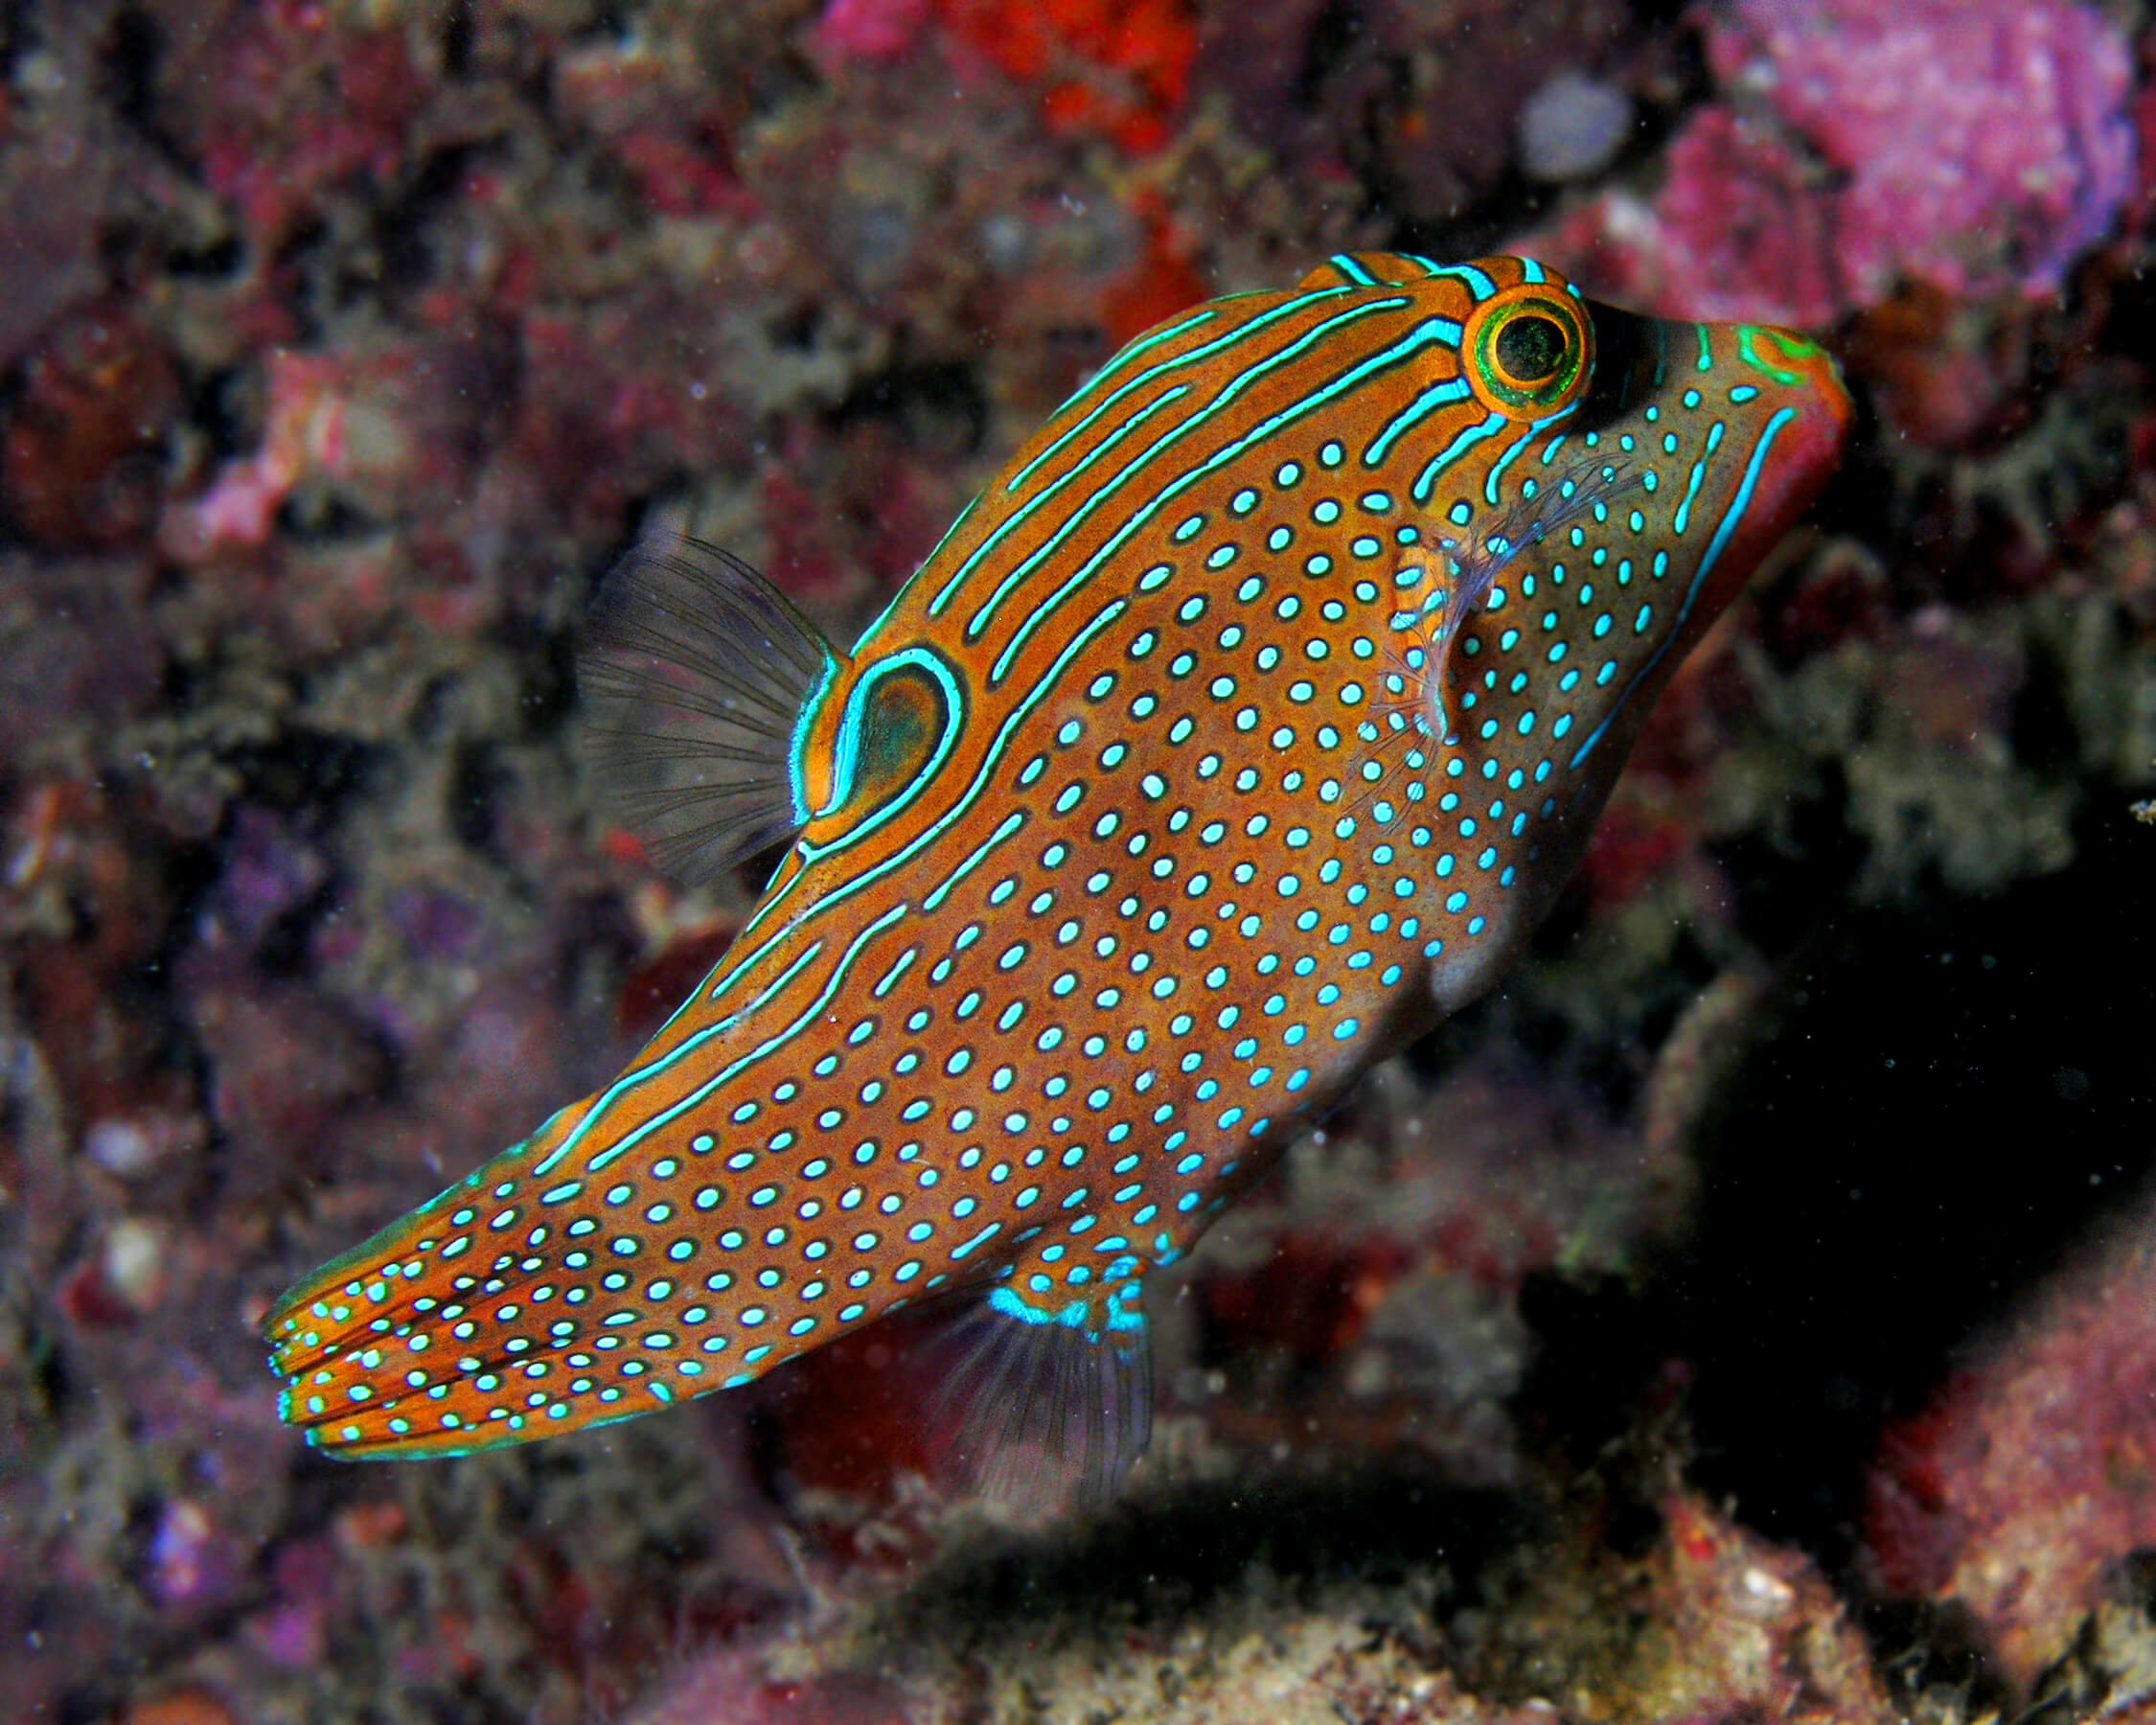 Image of a Blue Spotted Puffer